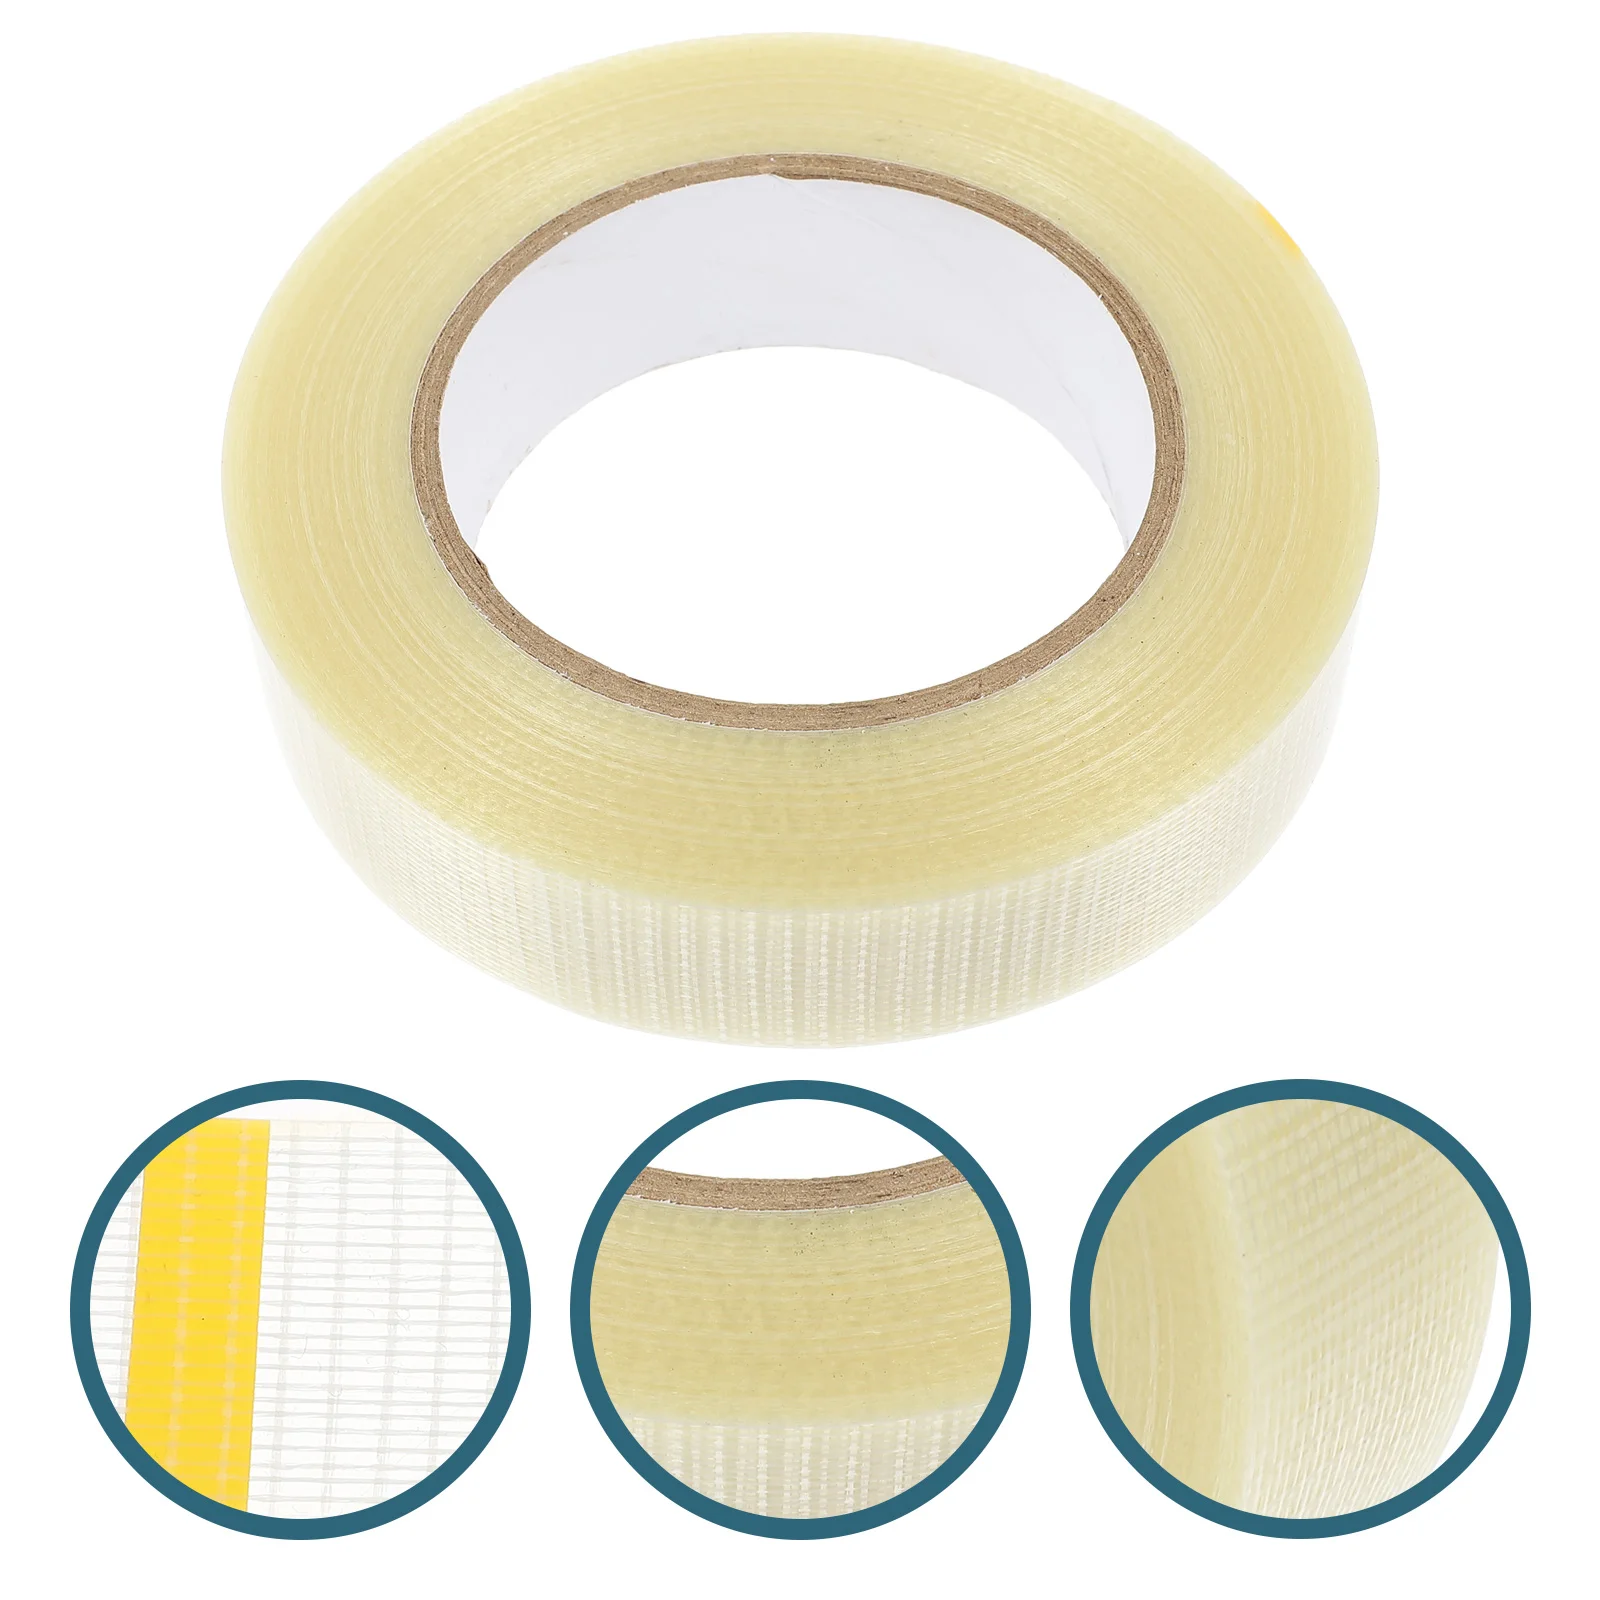 

Tape Fiberglass Strapping Mesh Reinforced Adhesive Drywall Filament Tapes Stripe Fiber Packing Transparent Packaging Useful Self